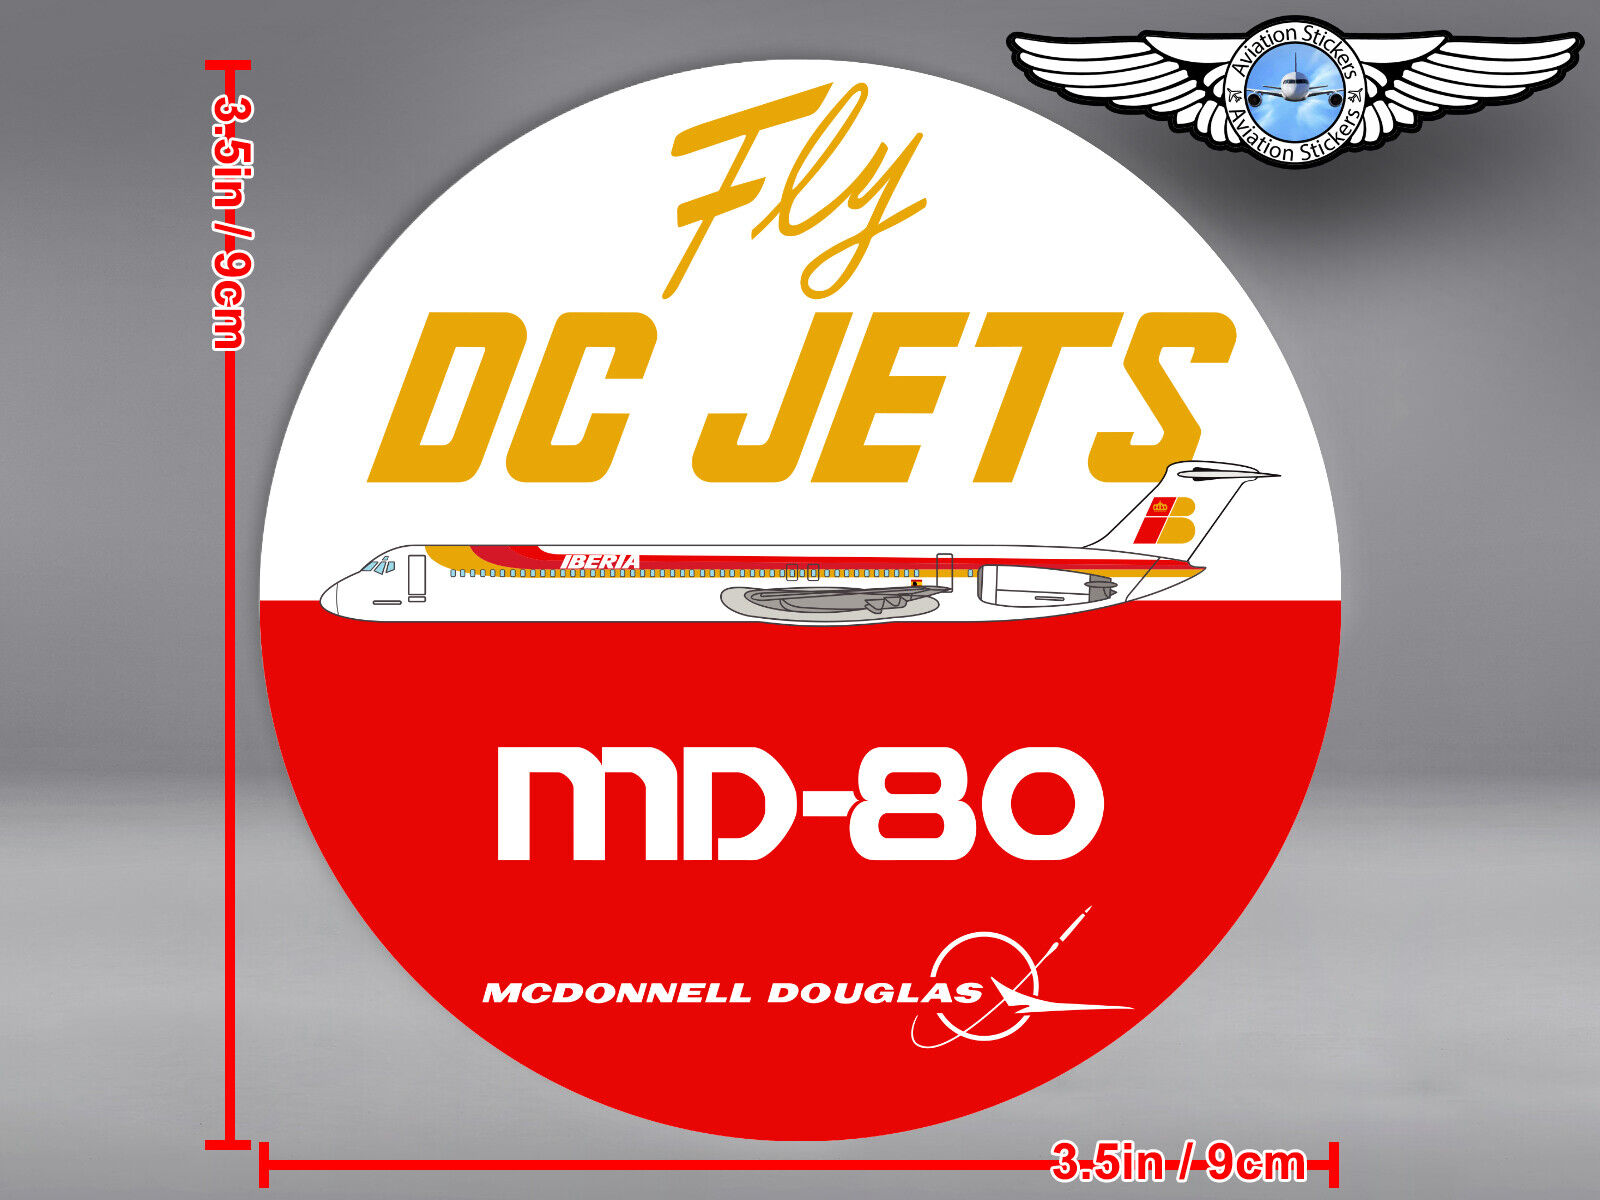 OLD IBERIA LIVERY ROUND MD80 MD 80 FLY DC JETS DECAL / STICKER